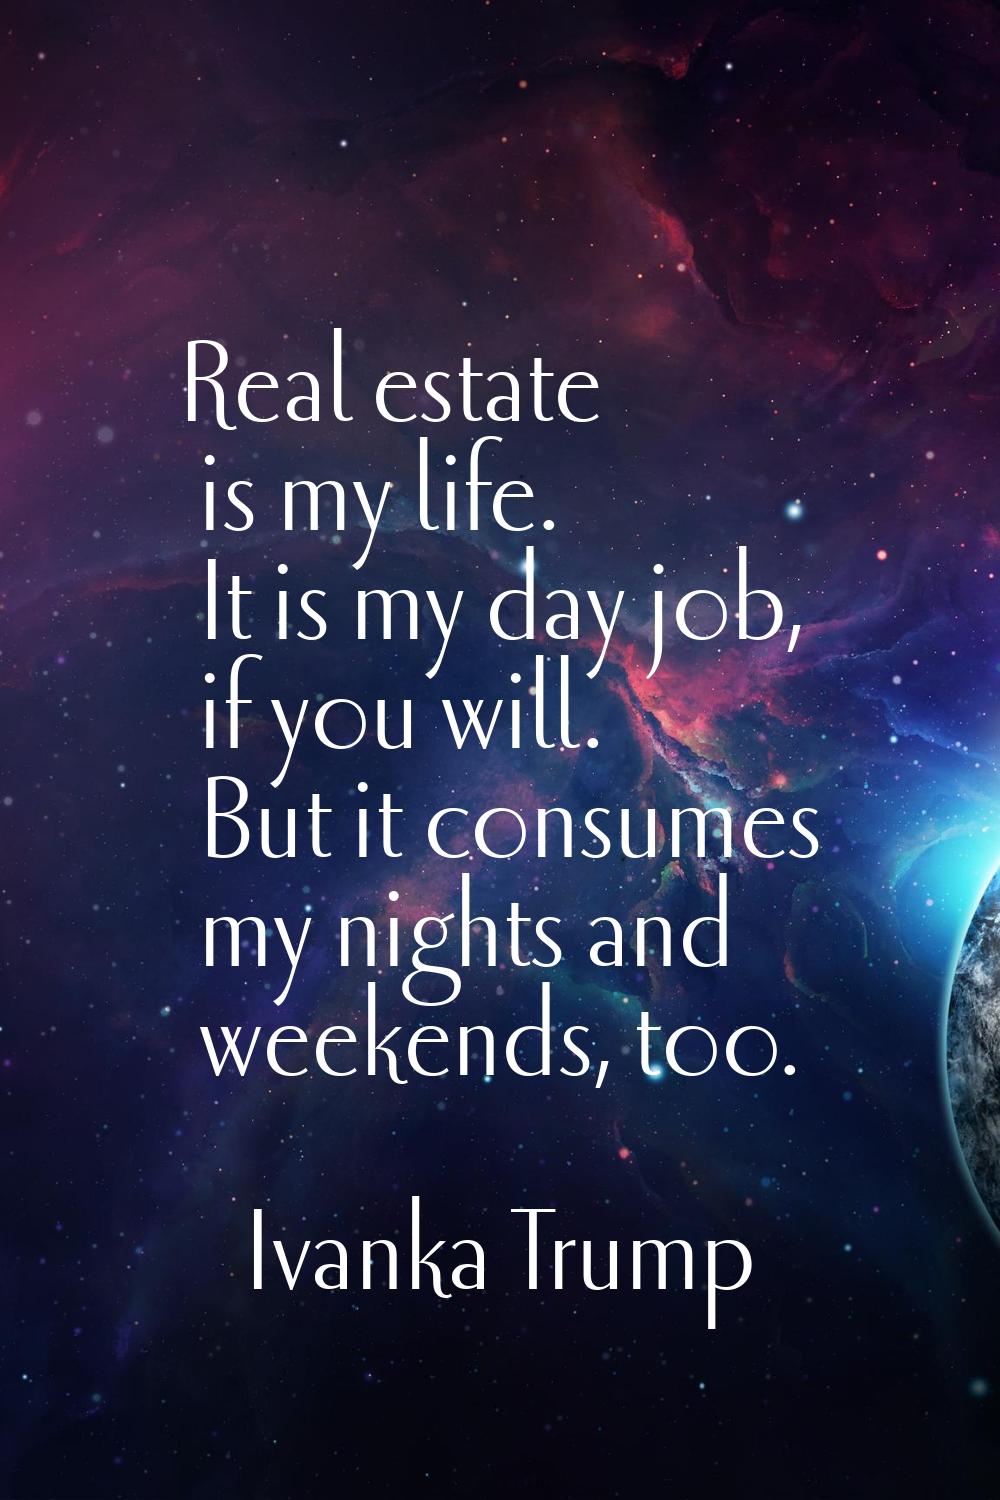 Real estate is my life. It is my day job, if you will. But it consumes my nights and weekends, too.